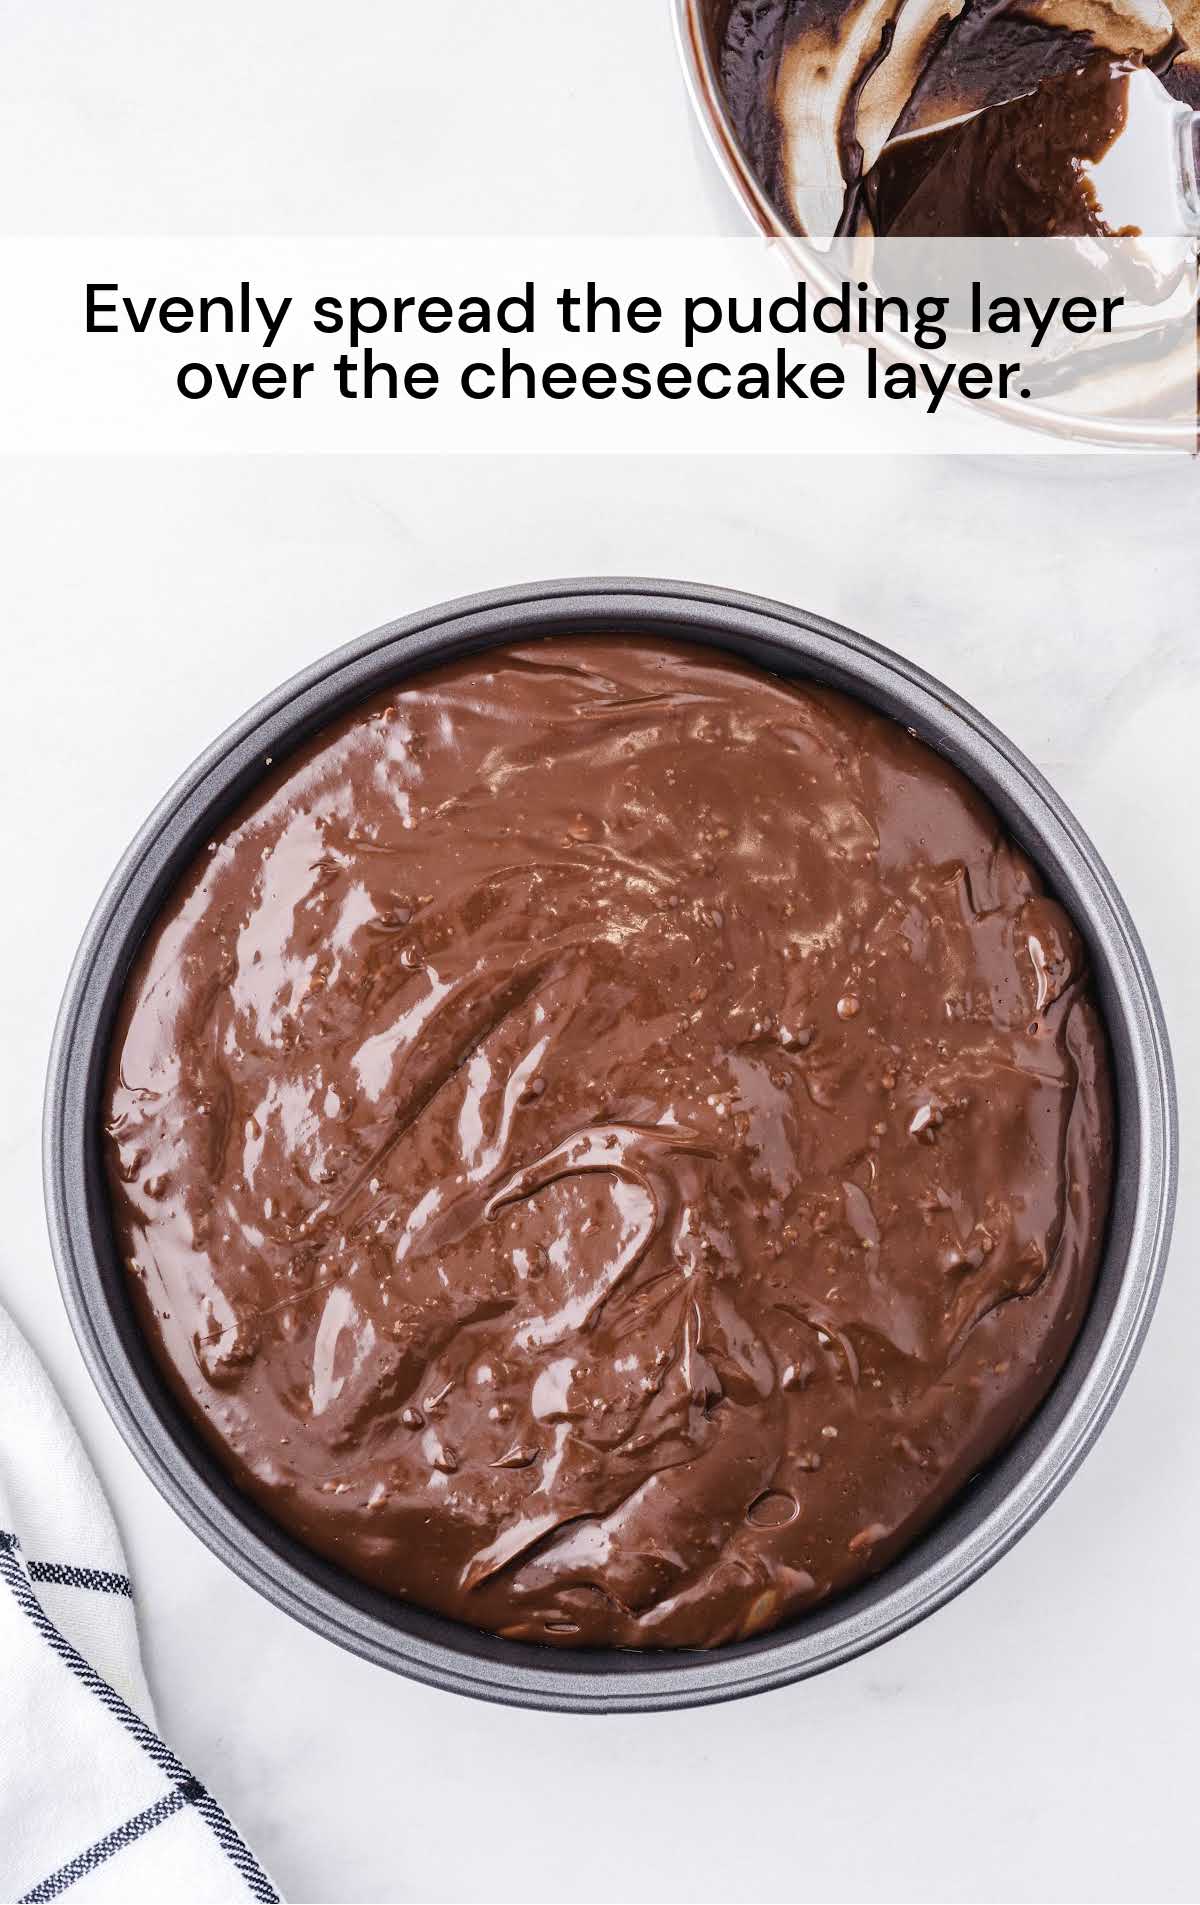 pudding layer spread over the cheesecake later in a baking dish